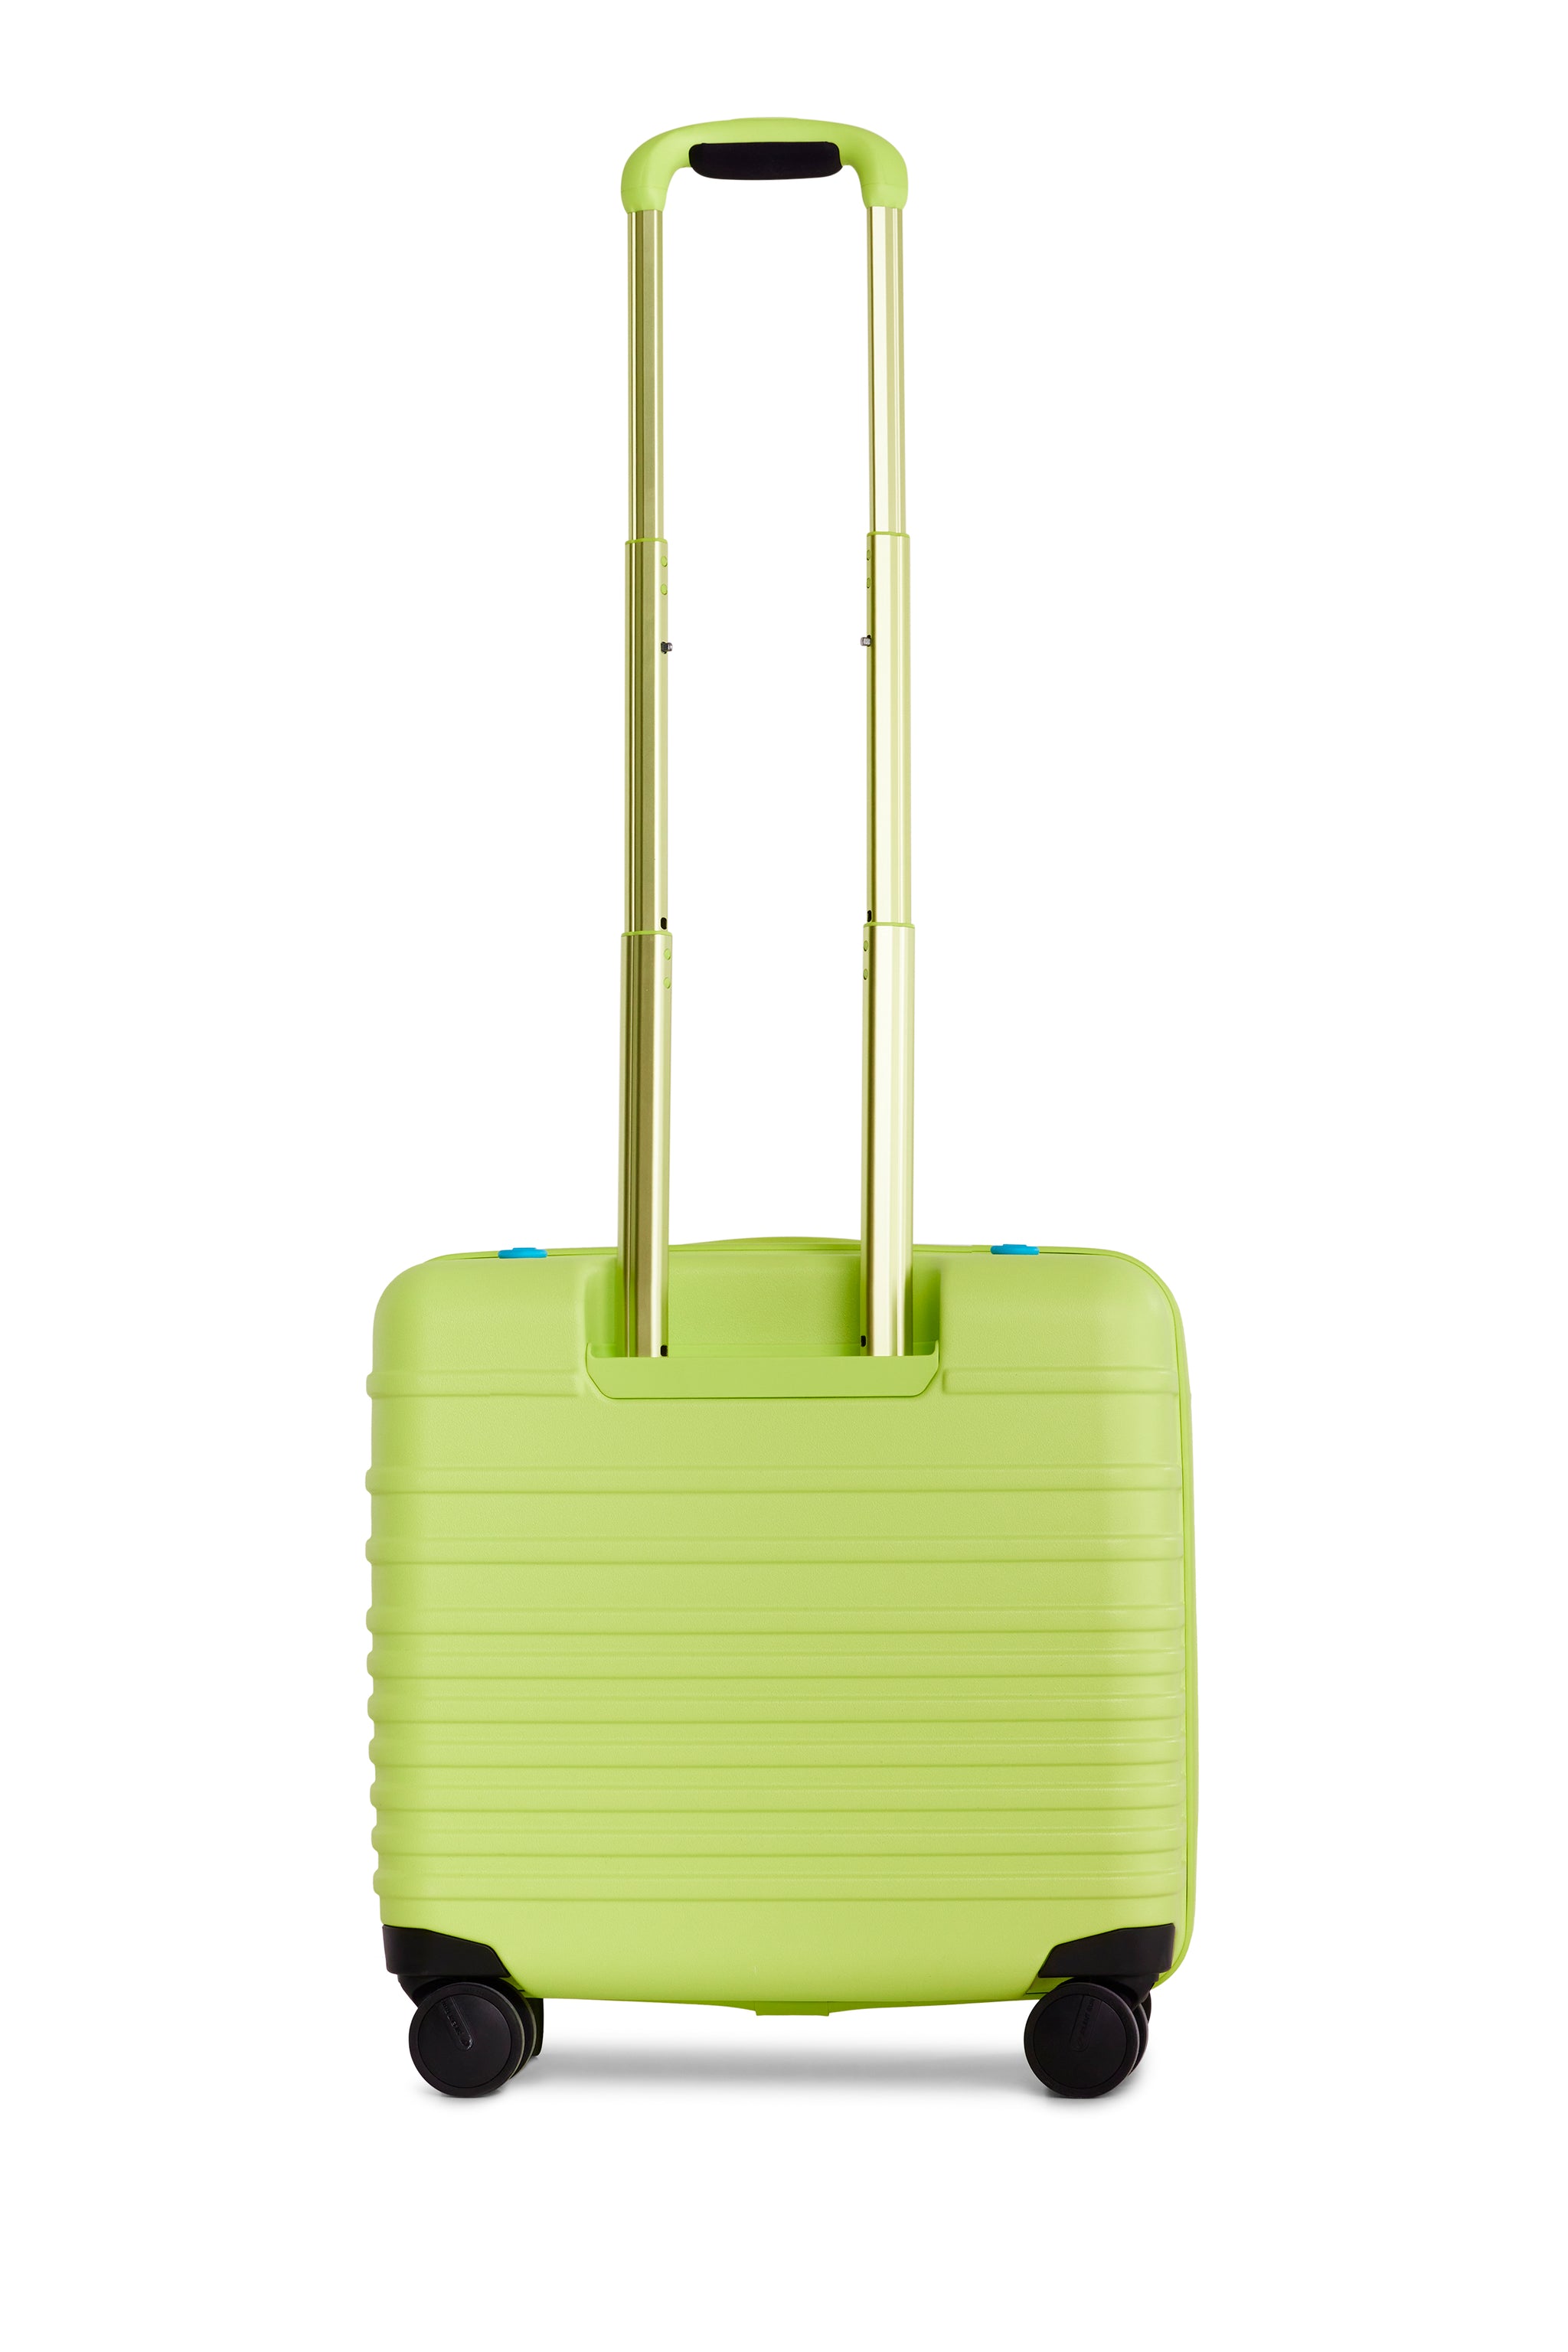 BÉIS 'The Kids Roller' in Citron - Kids Suitcases & Rolling Luggage In ...